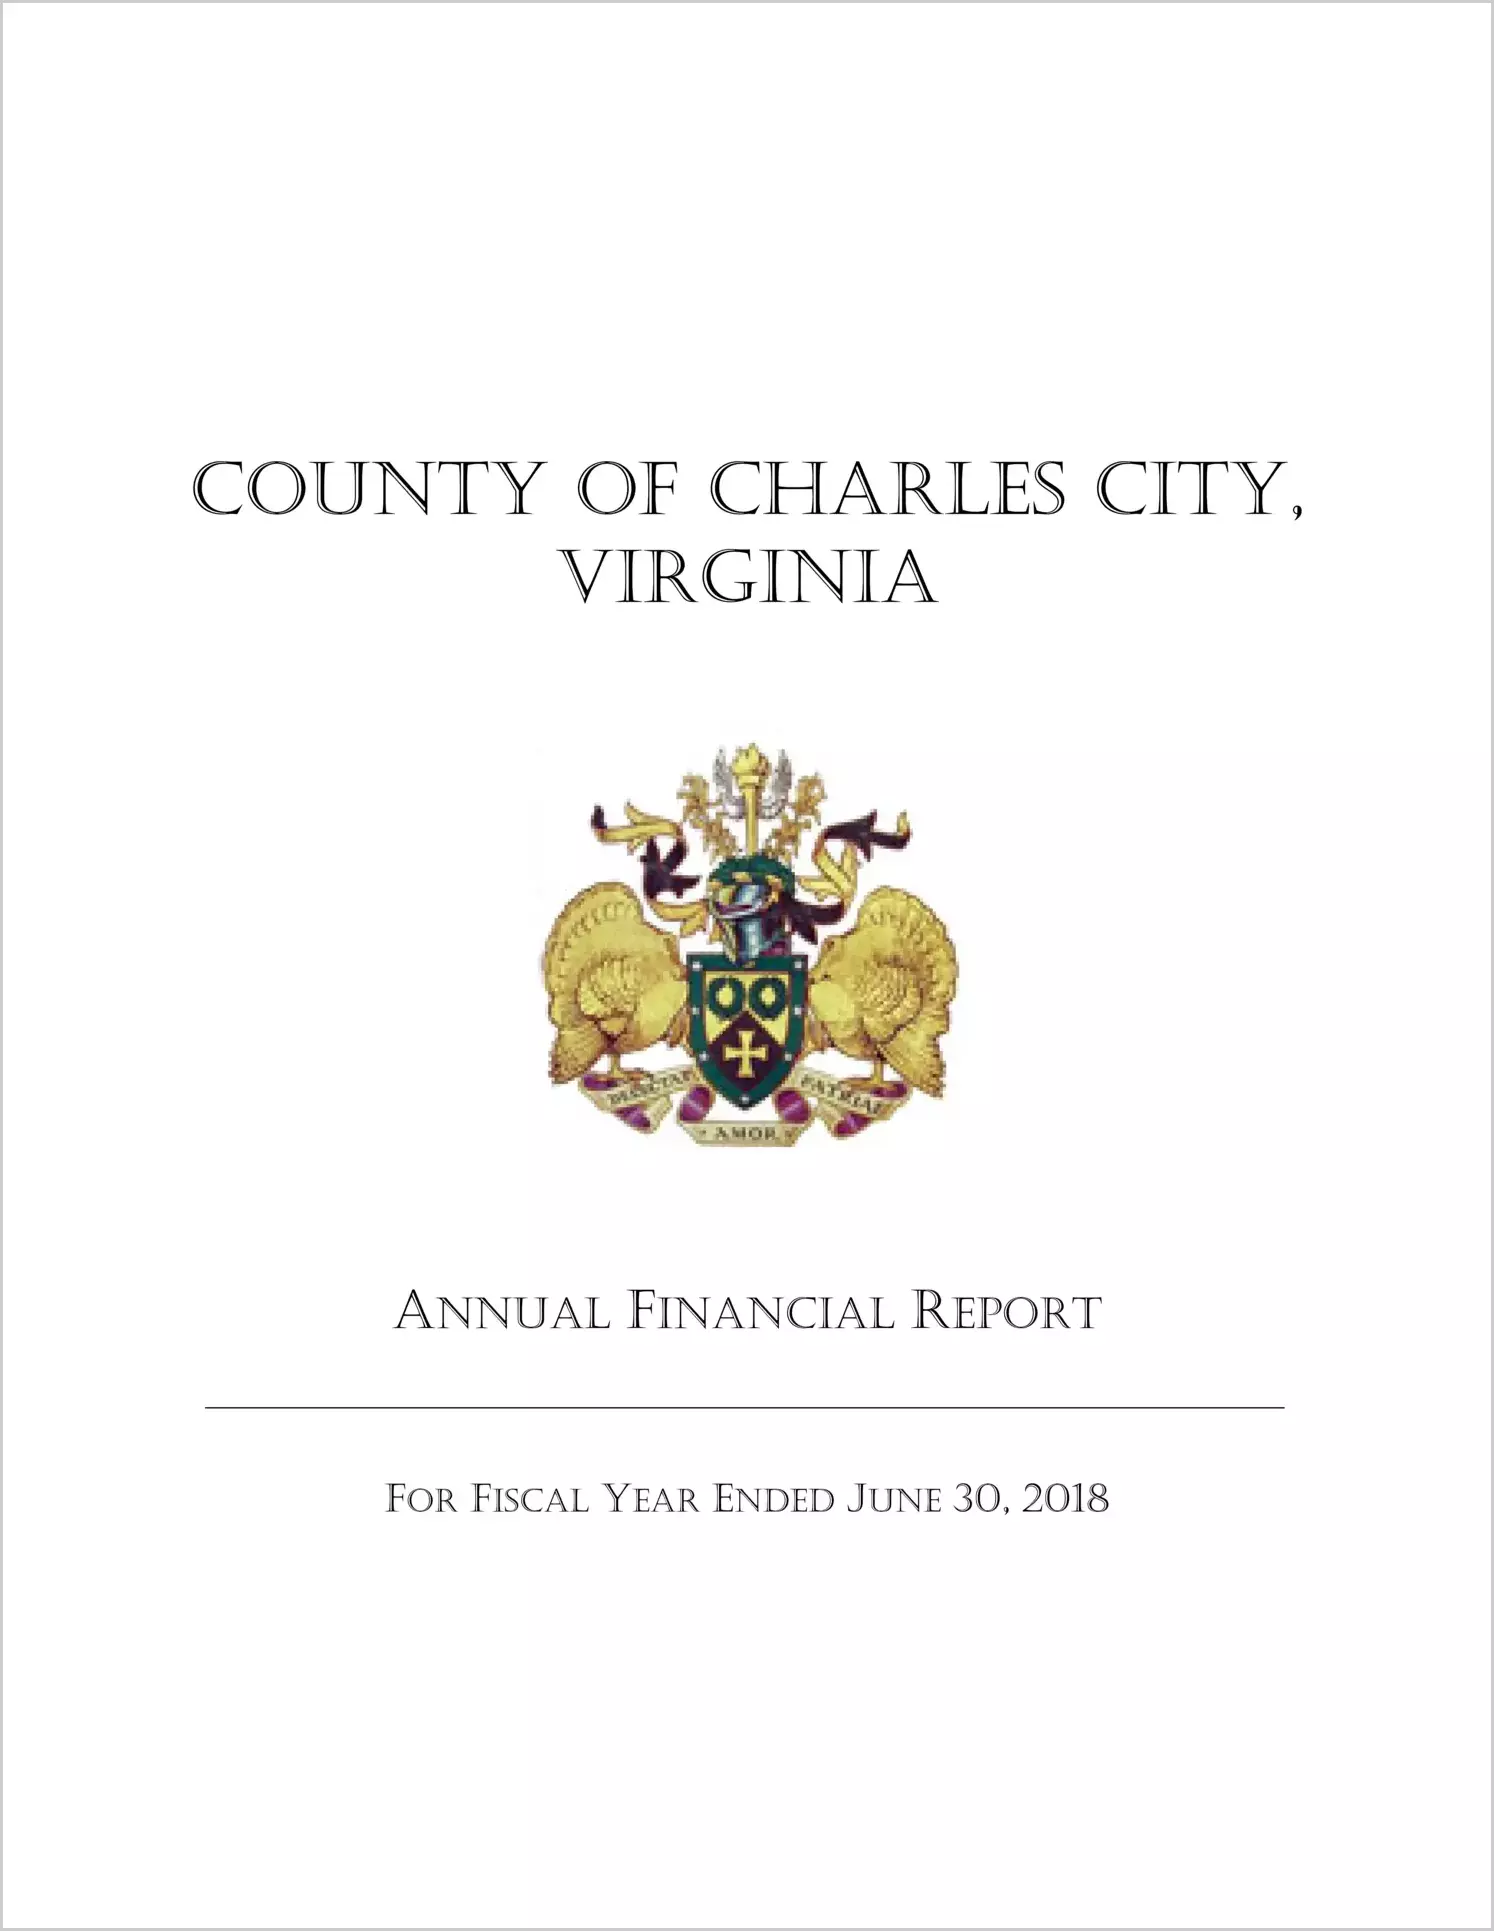 2018 Annual Financial Report for County of Charles City